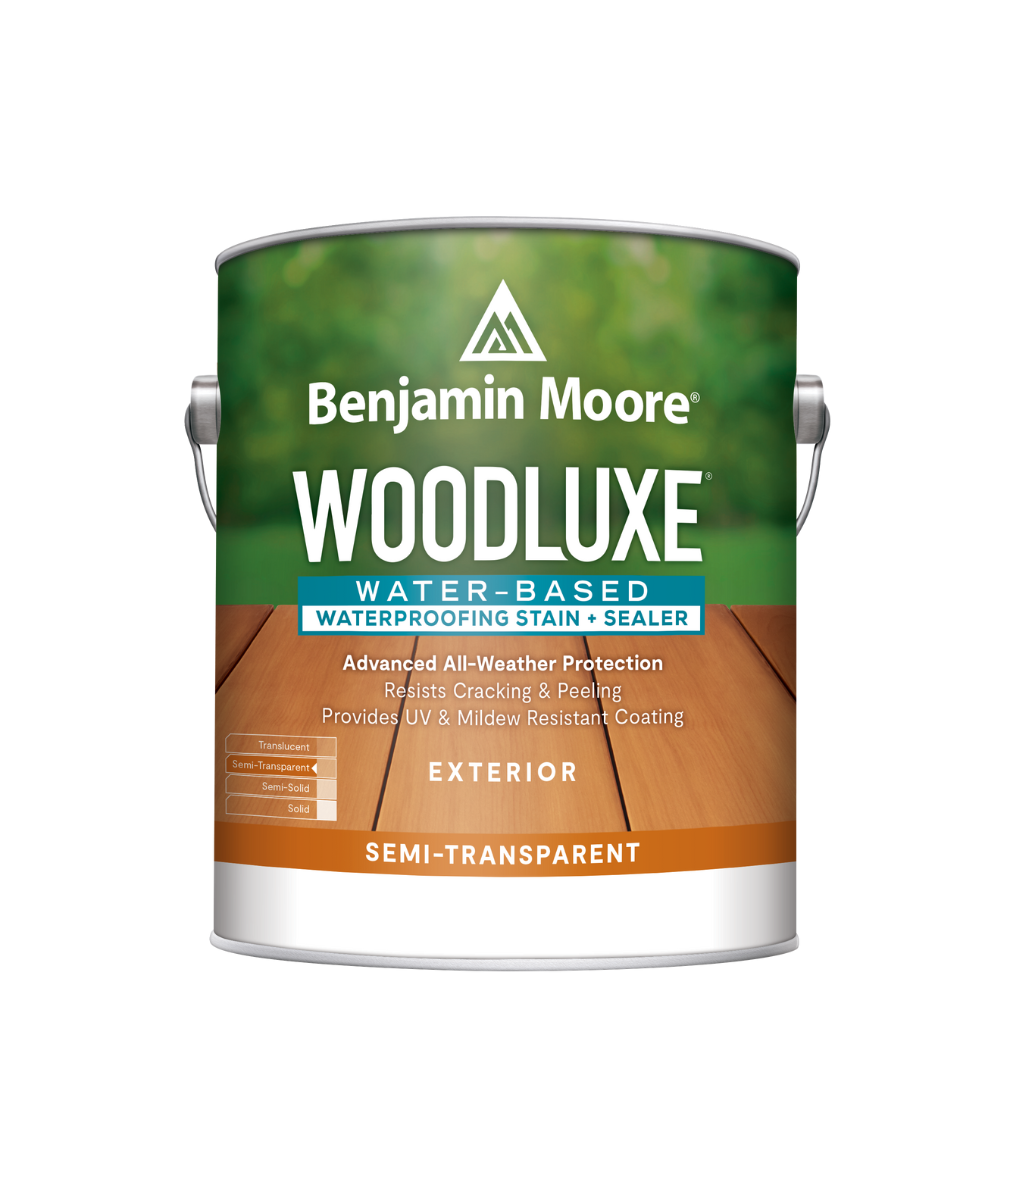 Benjamin Moore Woodluxe® Water-Based Semi-Transparent available to shop at Wallauers.